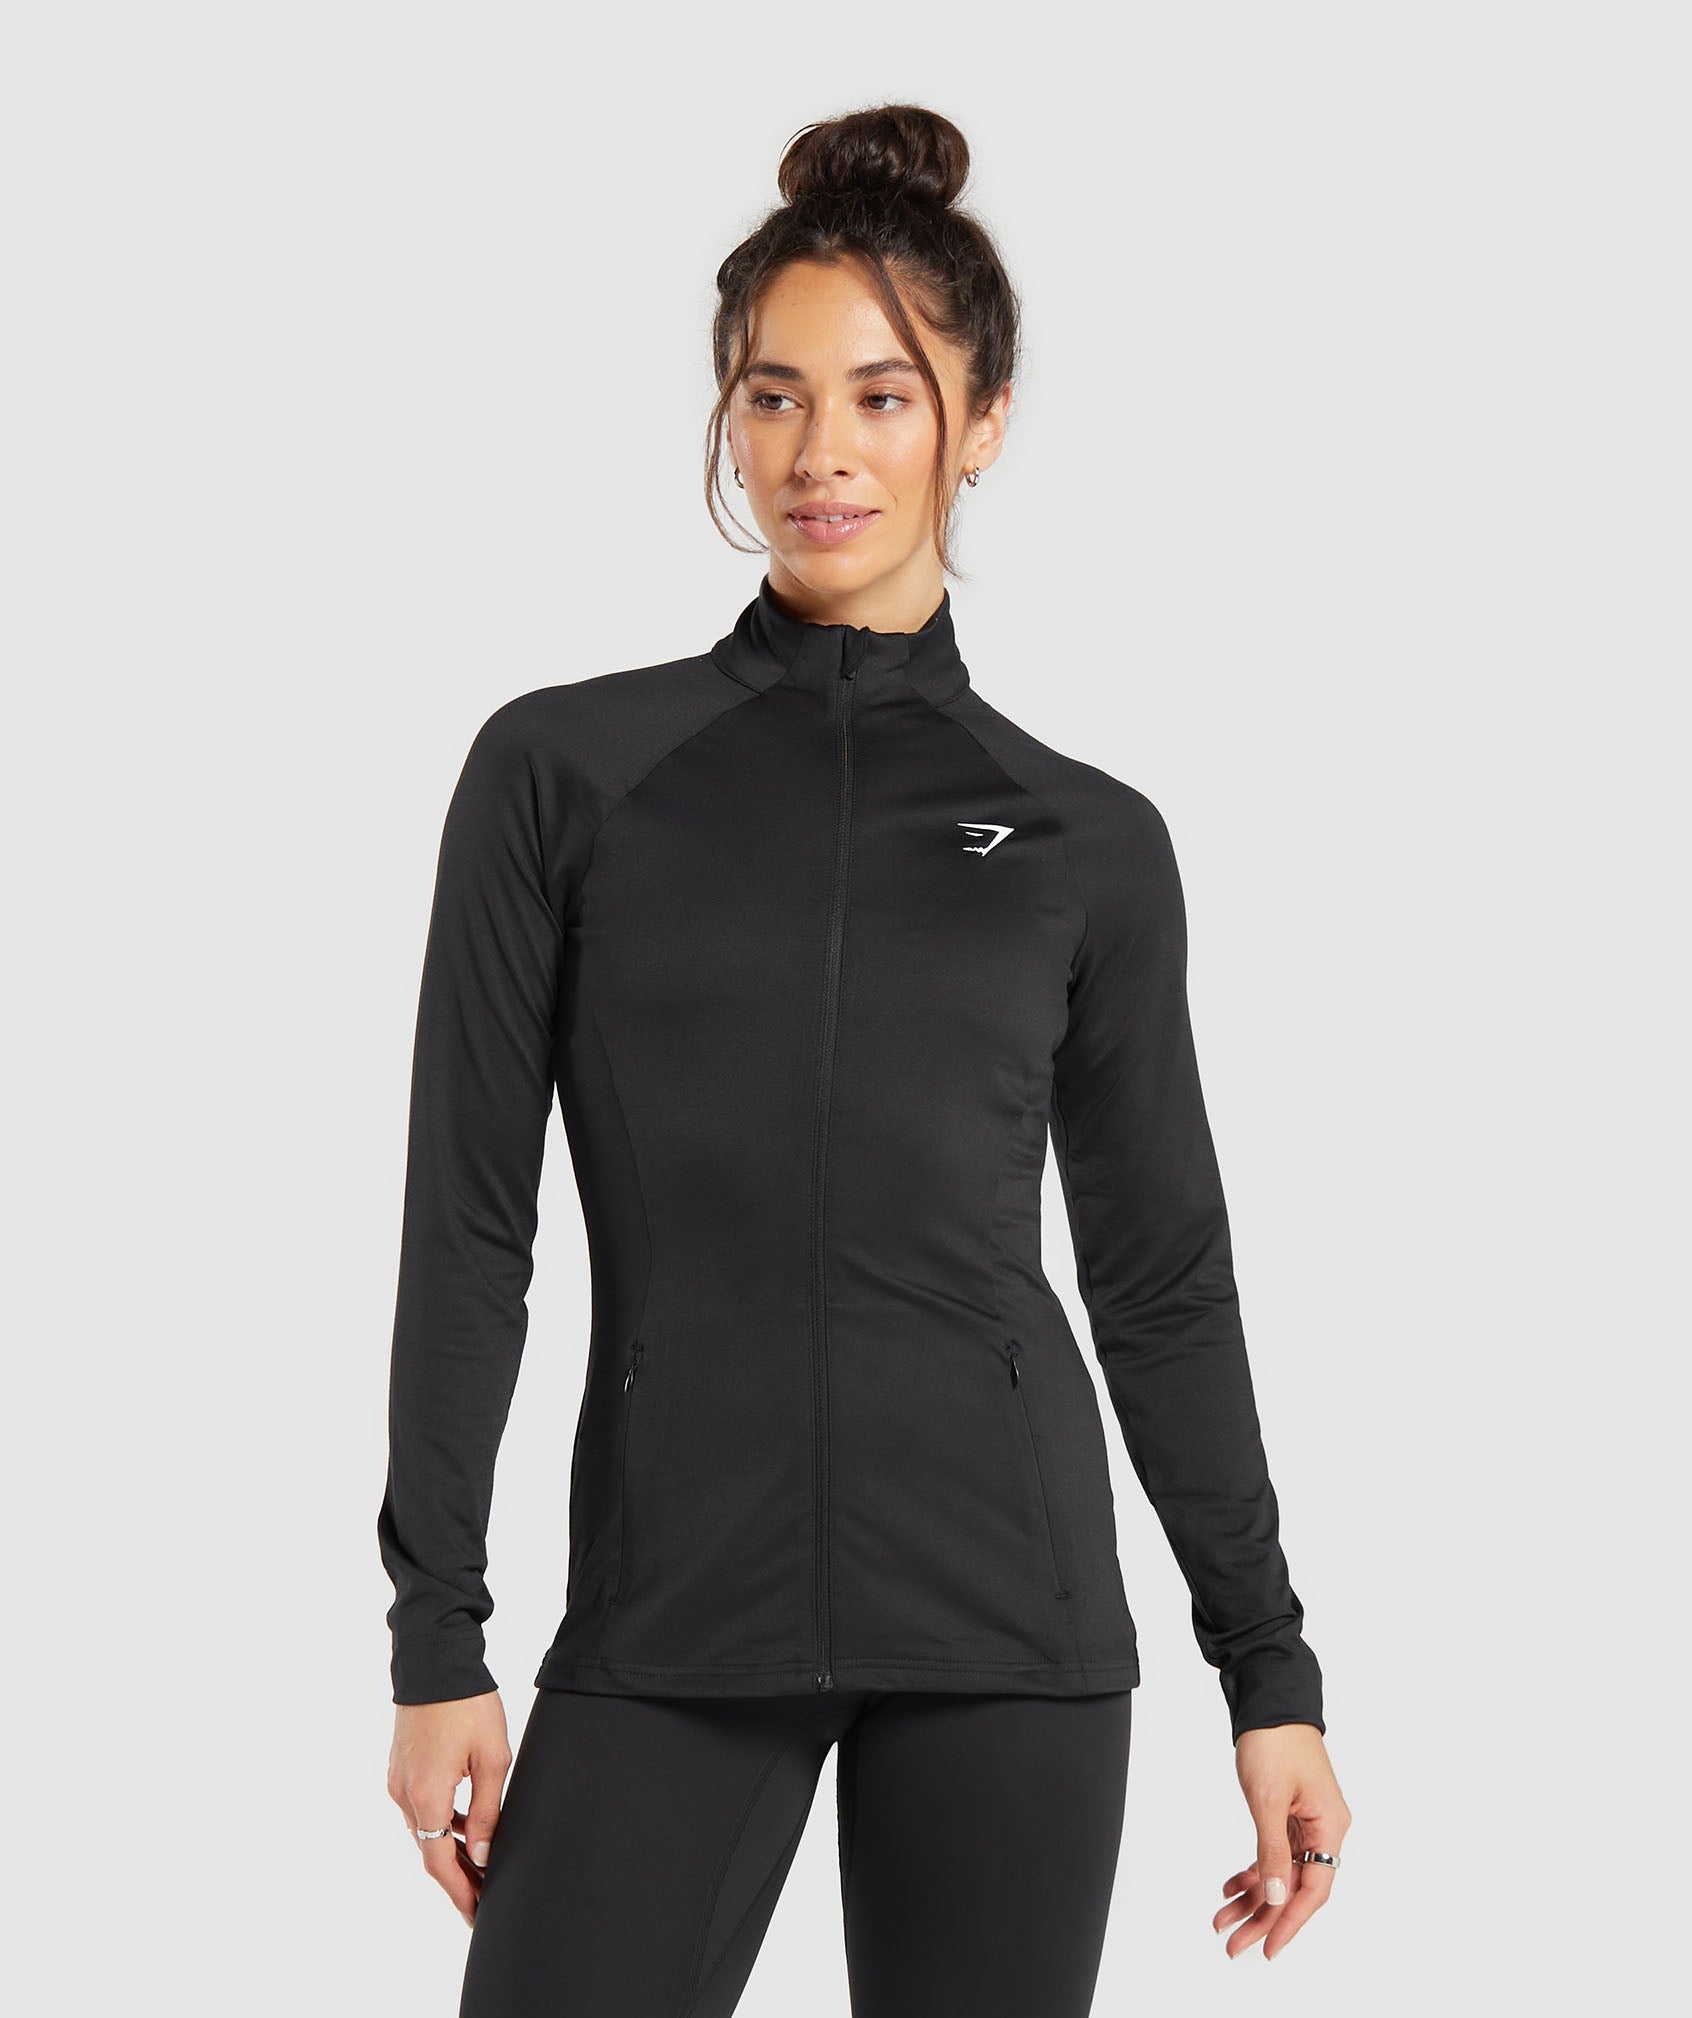 Training Zip Up Jacket in {{variantColor} is out of stock